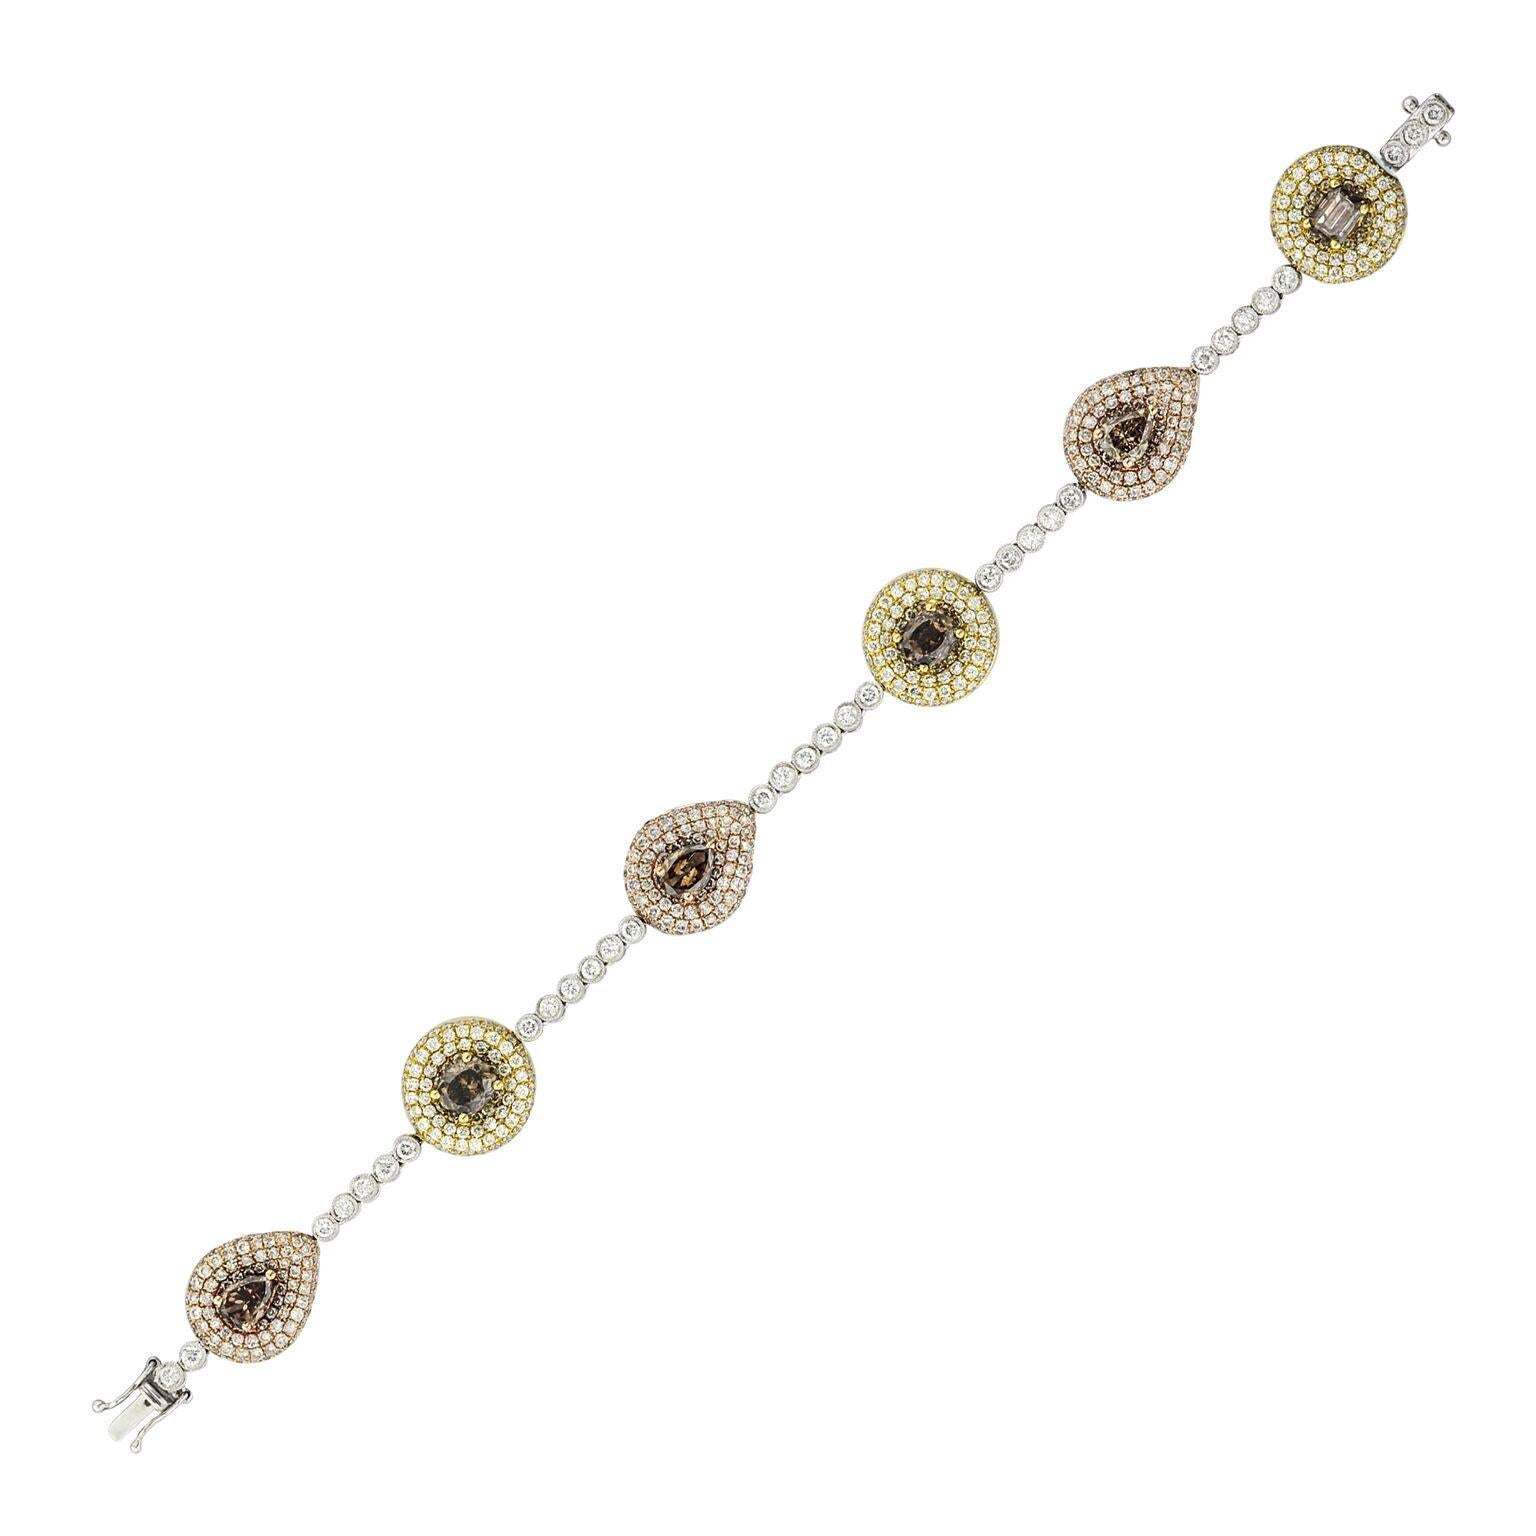 18kt white and yellow gold bracelet featuring 8.10 cts of fancy color diamonds
Diana M is one-stop shop for all your jewelry shopping, carrying line of diamond rings, earrings, bracelets, necklaces, and other fine jewelry.
We create our jewelry from